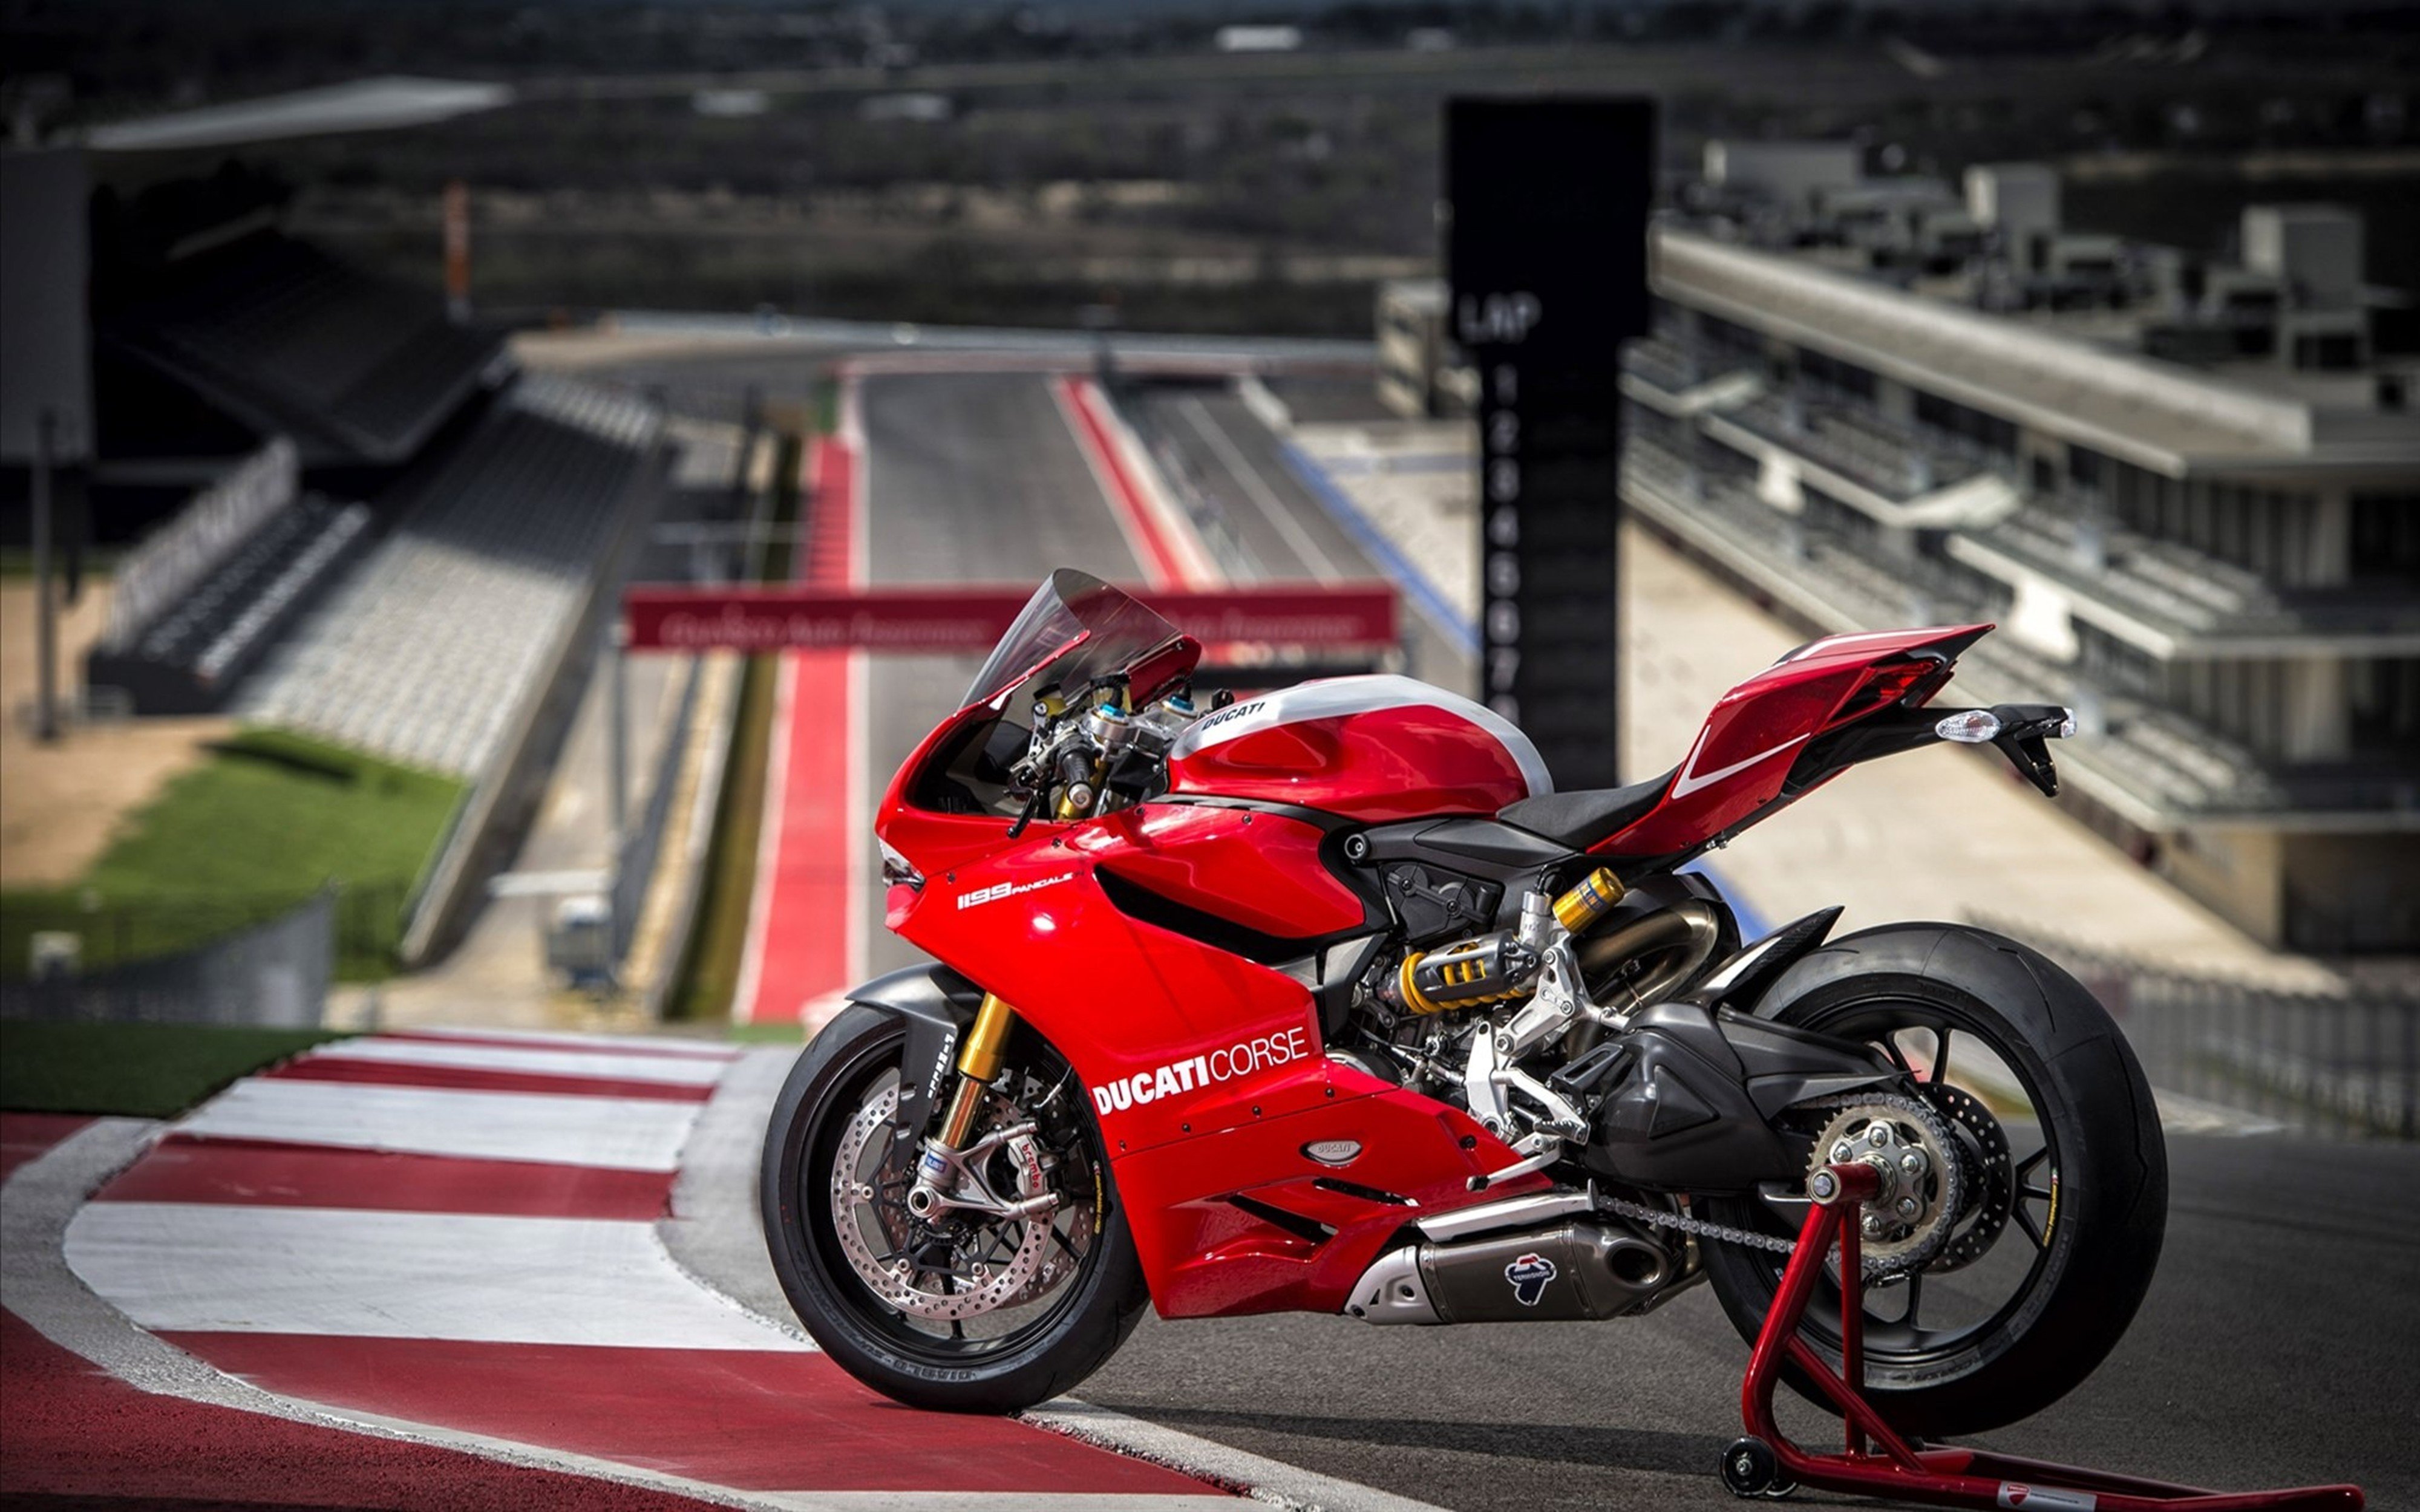 2013, Ducati, Superbike, 1199, Panigale r, Motorcycle, Corse, 4000x2500 Wallpaper